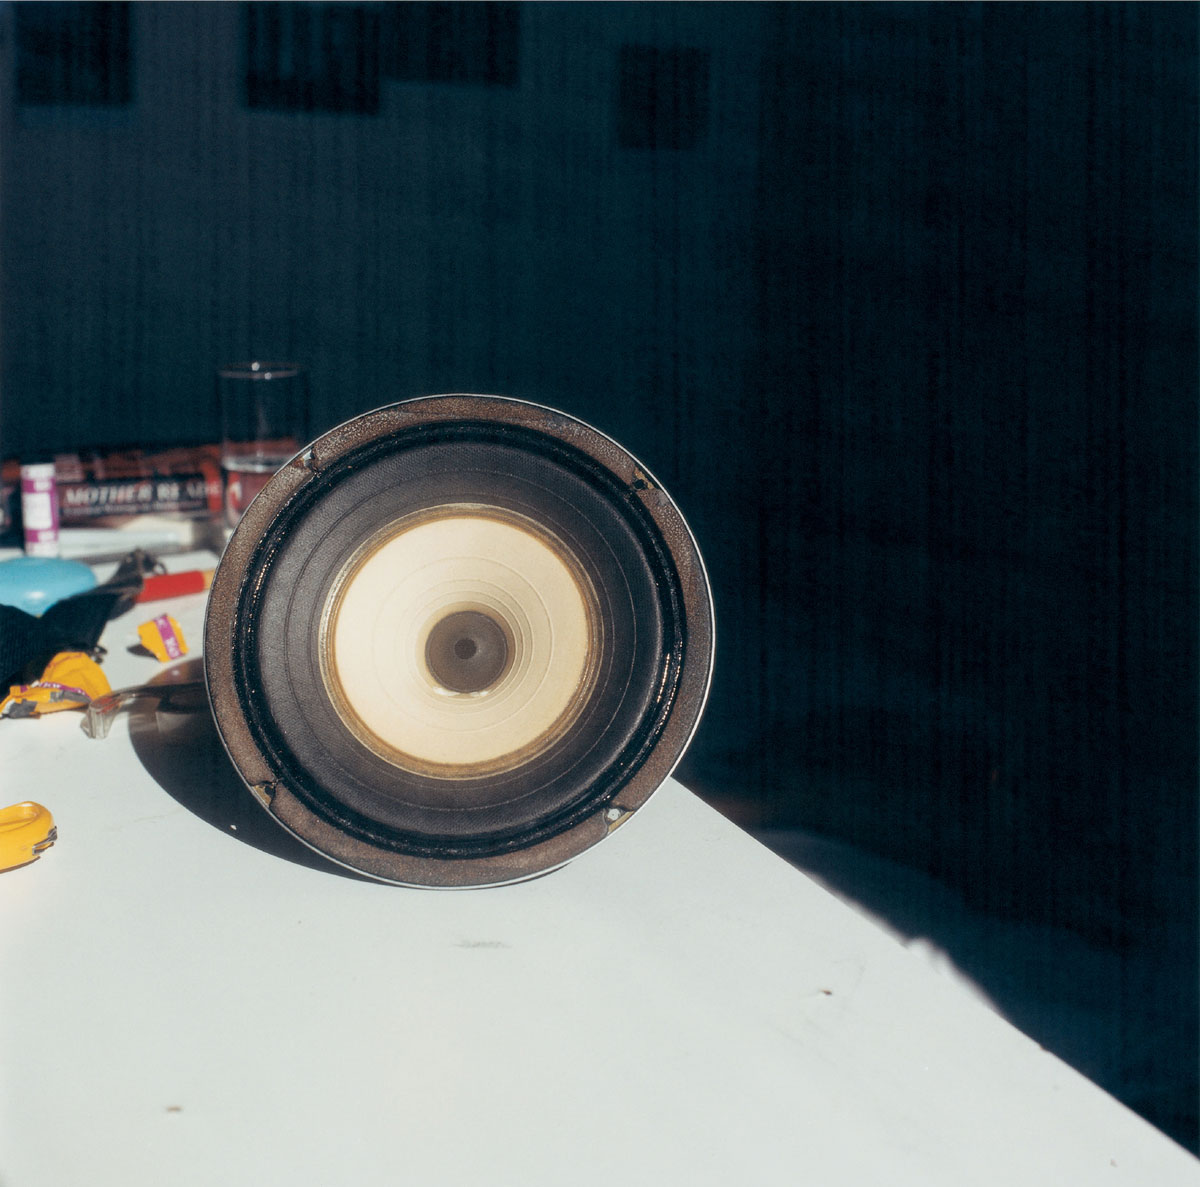 A 2003 photograph by artist Moyra Davey titled “Untitled (Speaker).”  